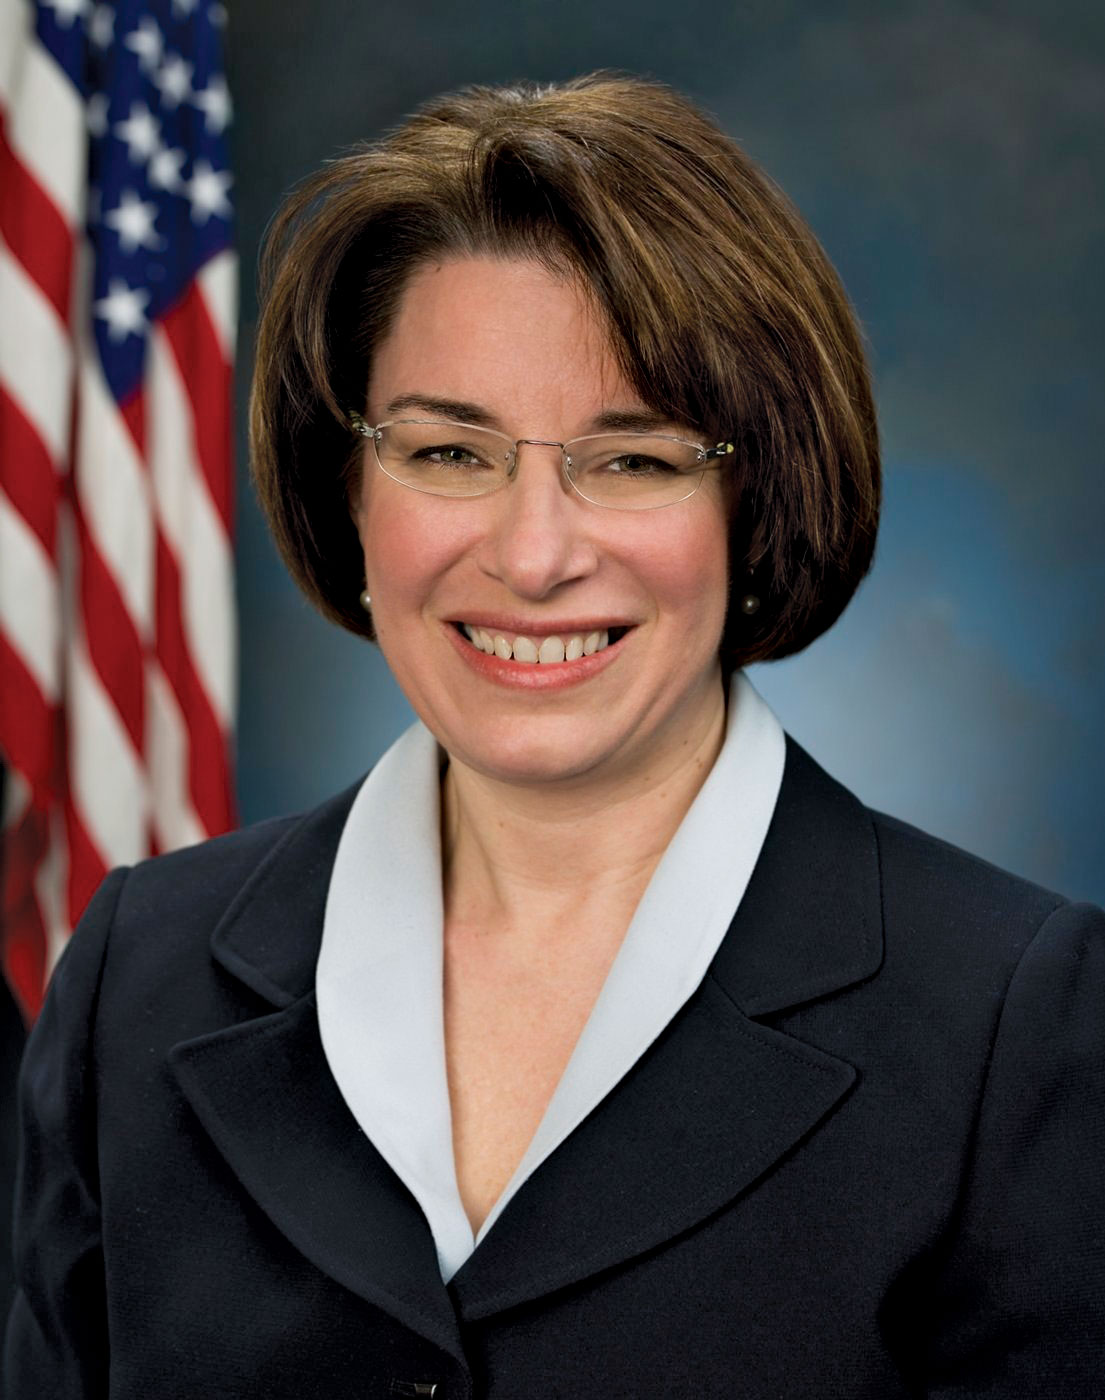 Amy Klobuchar is first woman elected U.S. Senator from Minnesota placeholder image.